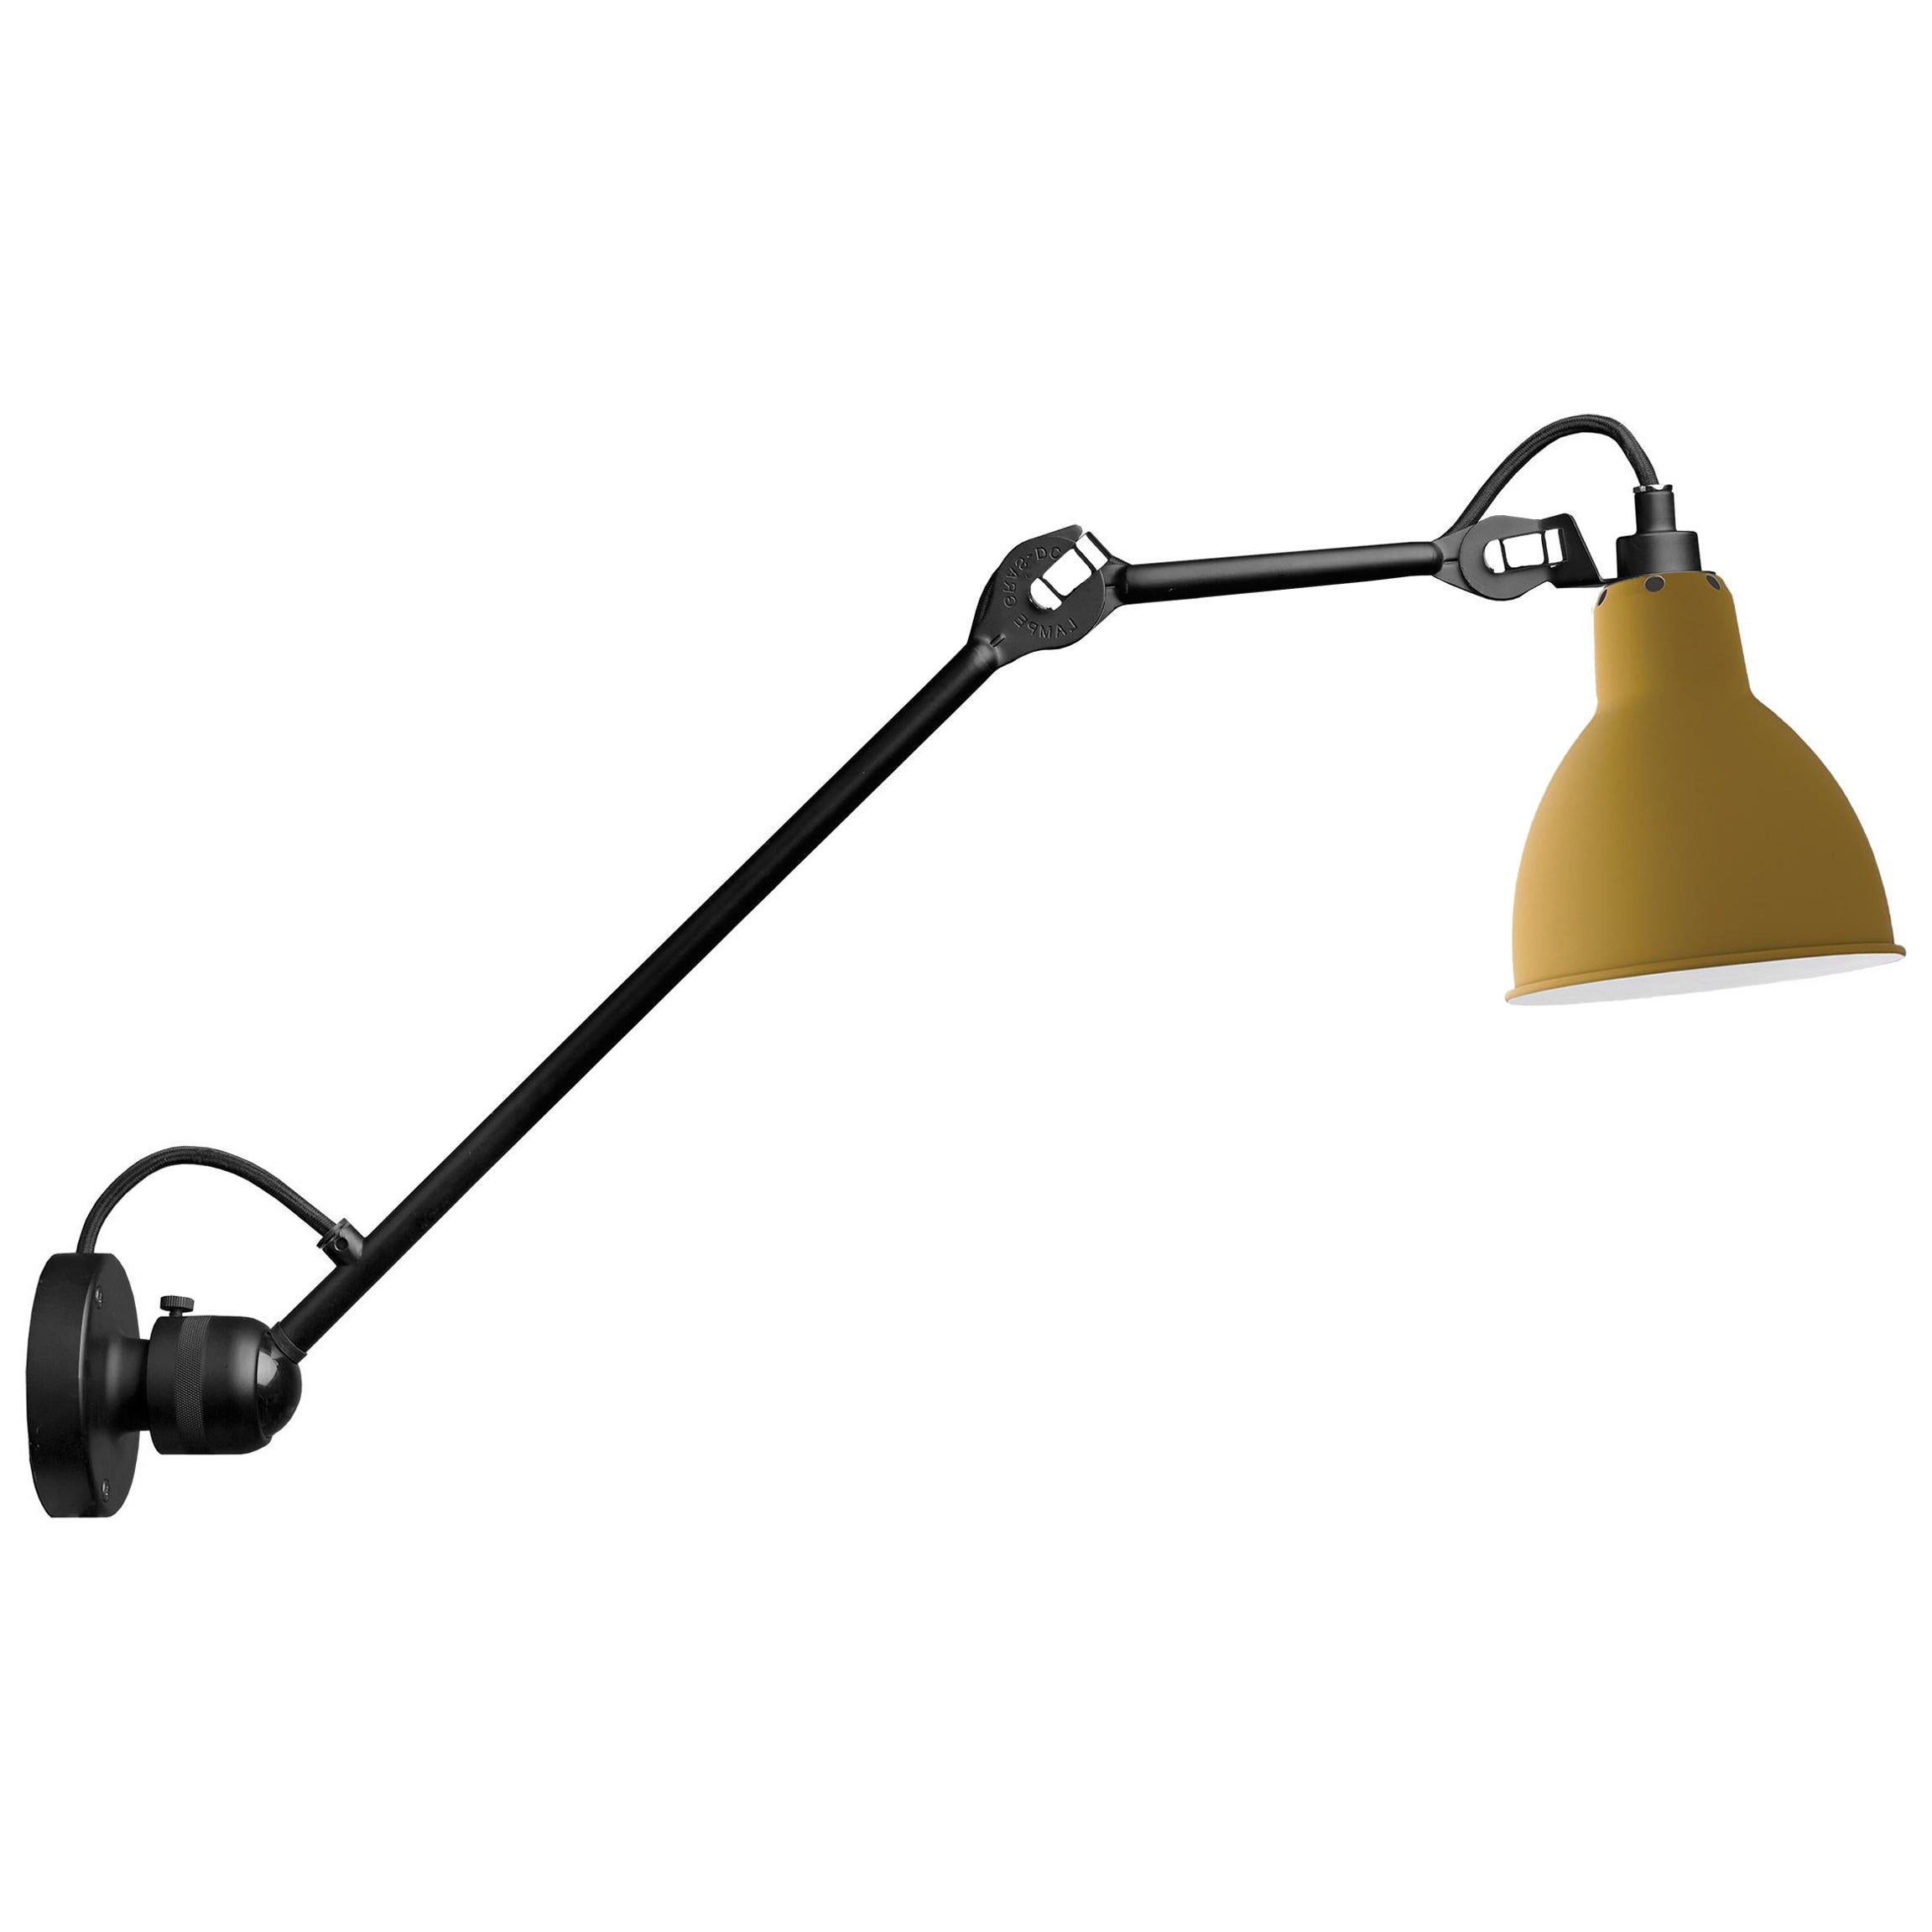 DCW Editions La Lampe Gras N°304 L40 Wall Lamp in Black Arm and Yellow Shade For Sale